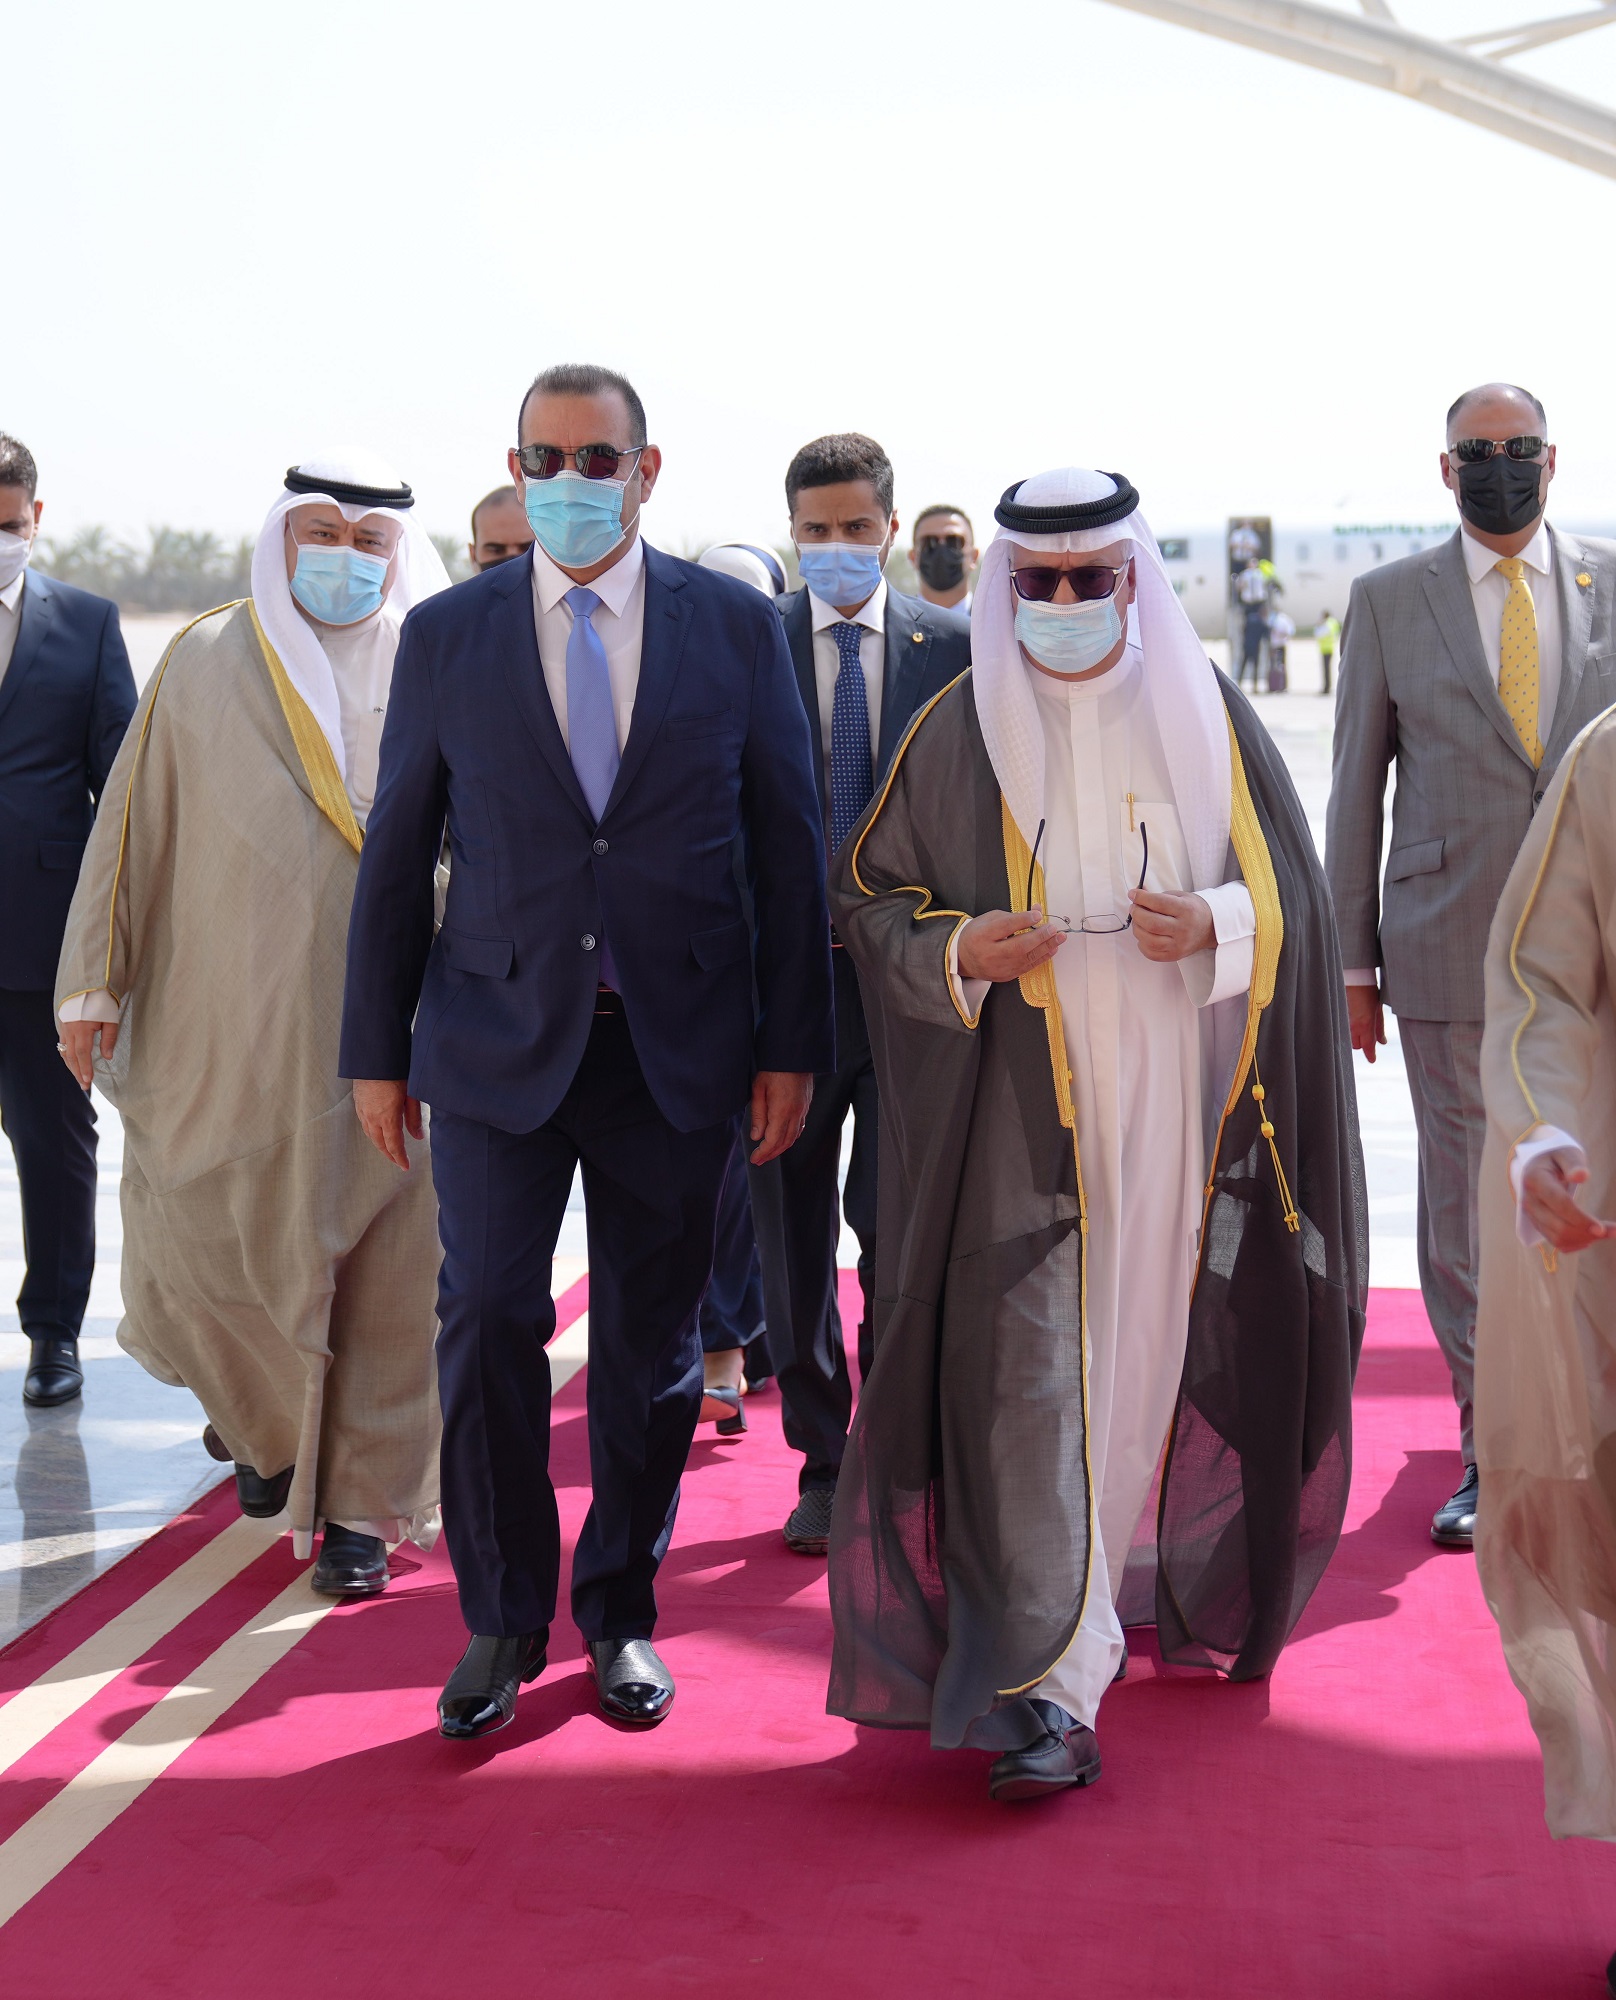 Representative of Iraq's Prime Minister, Minister of Planning arrives in Kuwait on an official visit